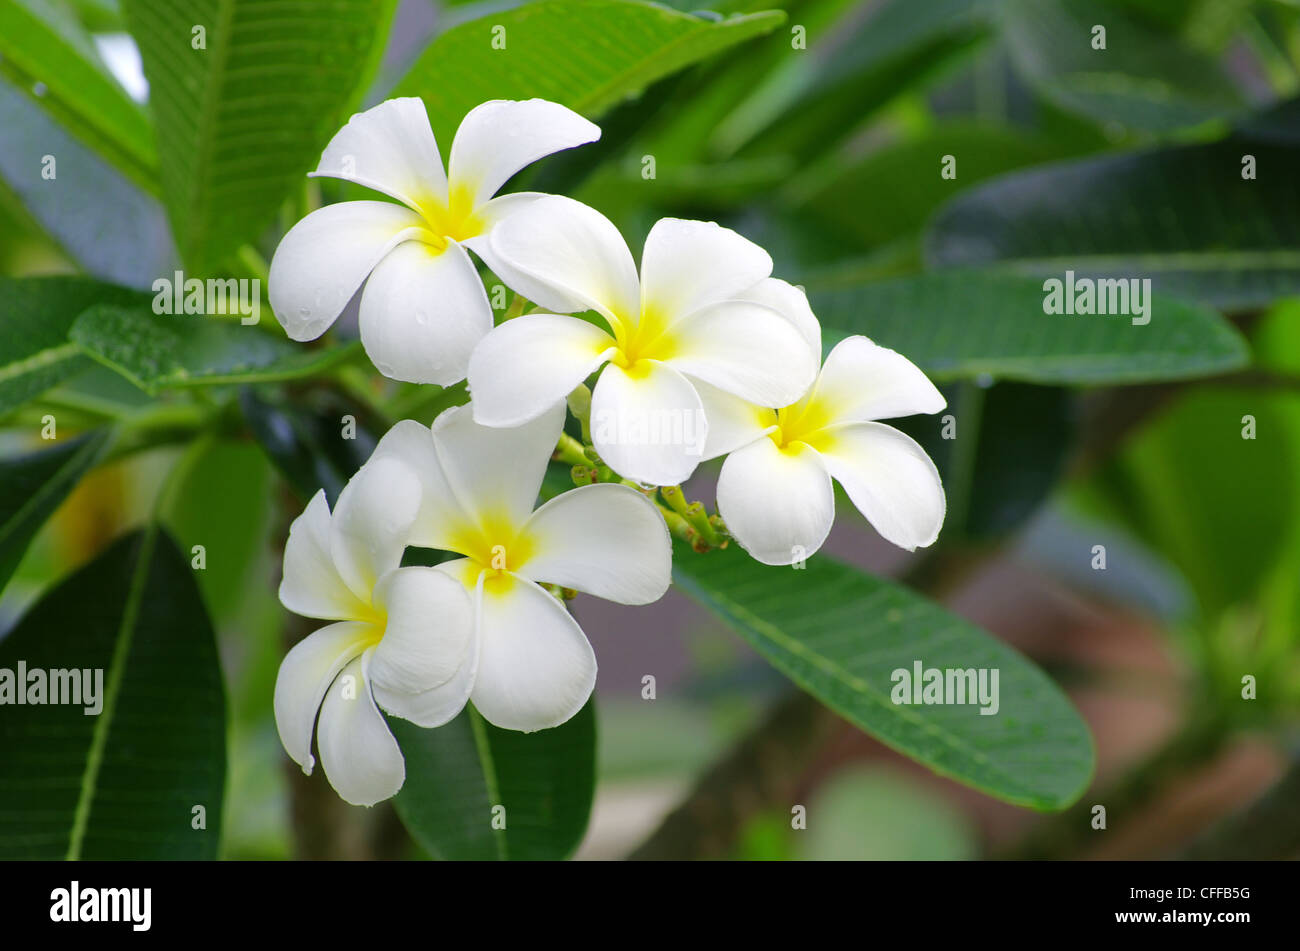 Frangipani flowers on a tree in the garden Stock Photo